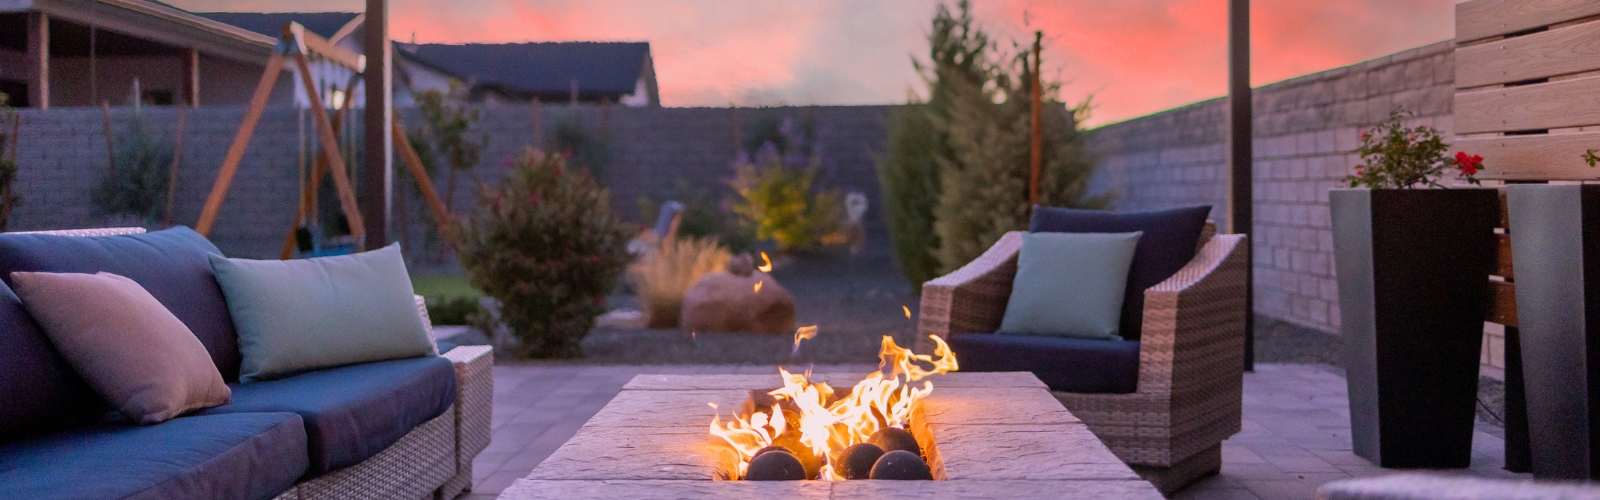 A cozy outdoor patio at sunset features a modern fire pit with flames dancing in the center. Surrounding the fire pit are comfortable wicker chairs with colorful cushions. In the background, a neatly landscaped garden and swing set are visible.